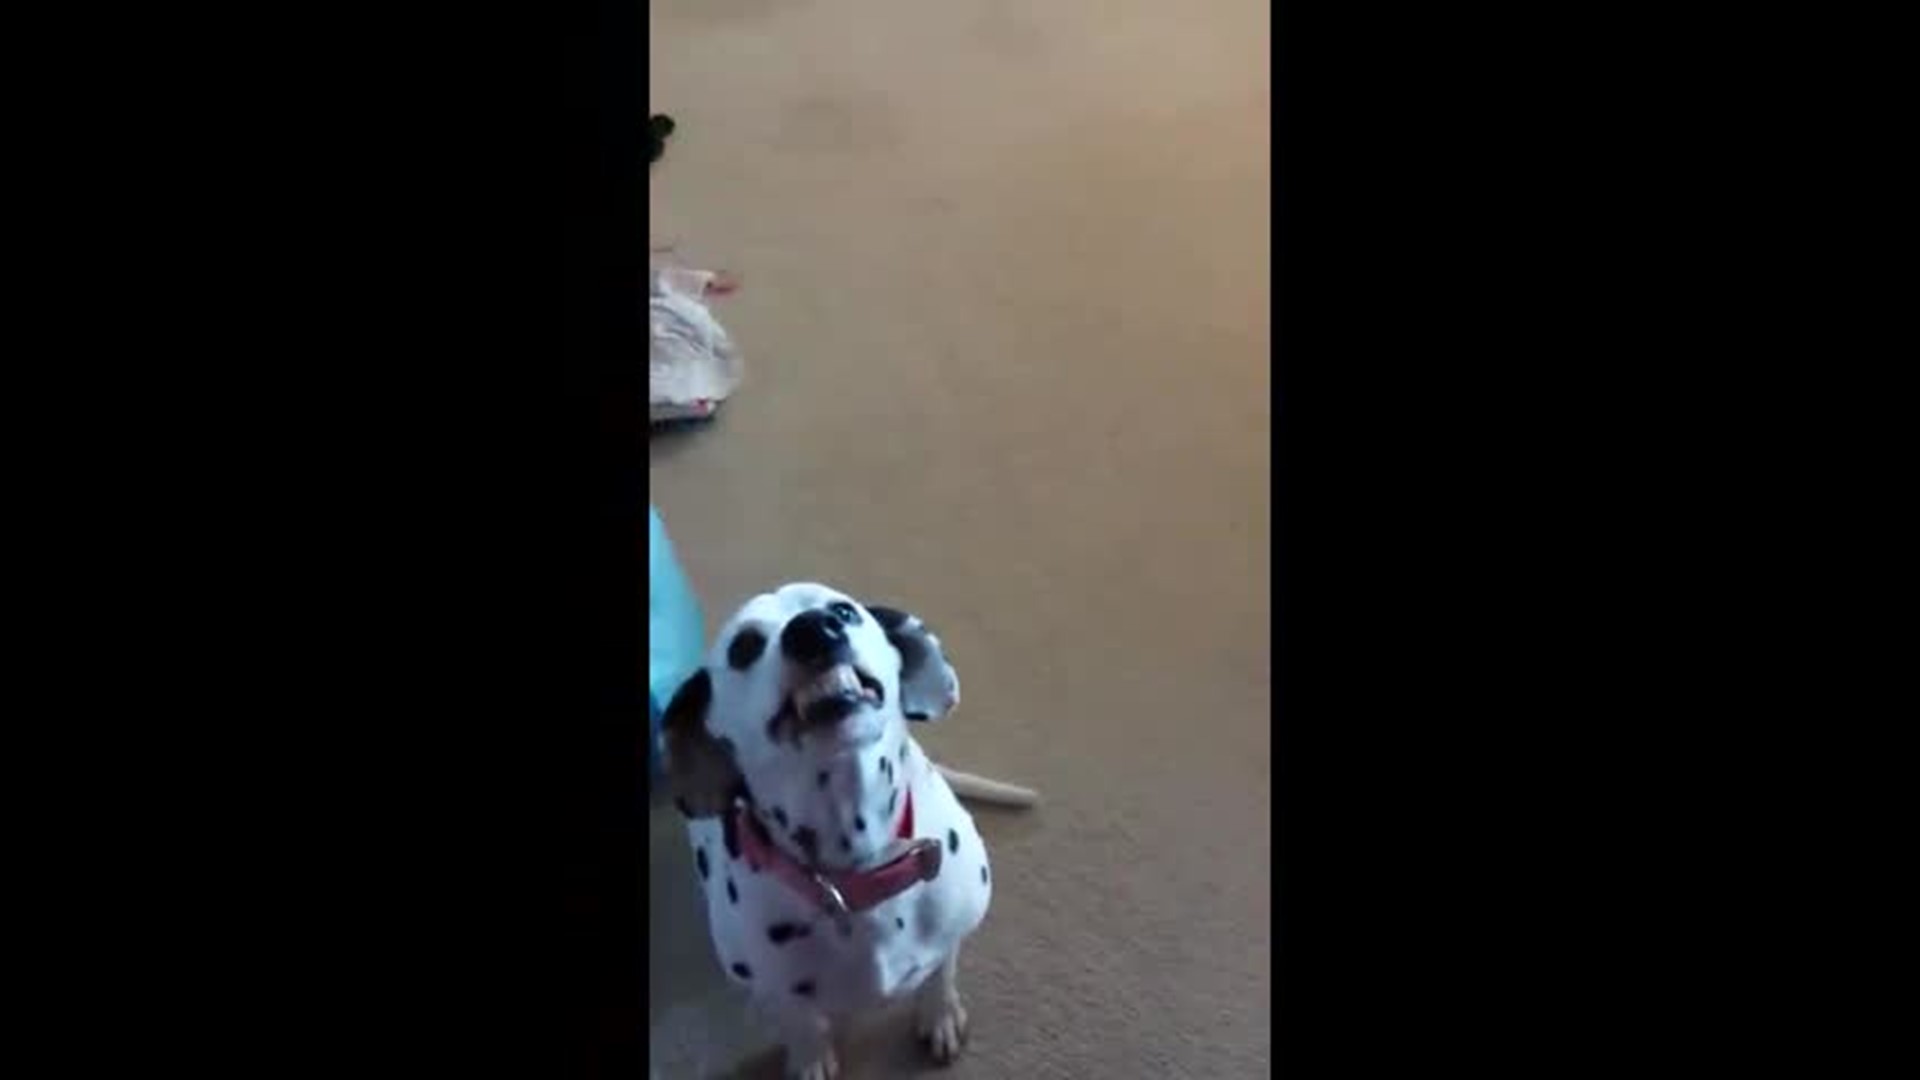 Video shows dog doing hilarious 'scary smile'